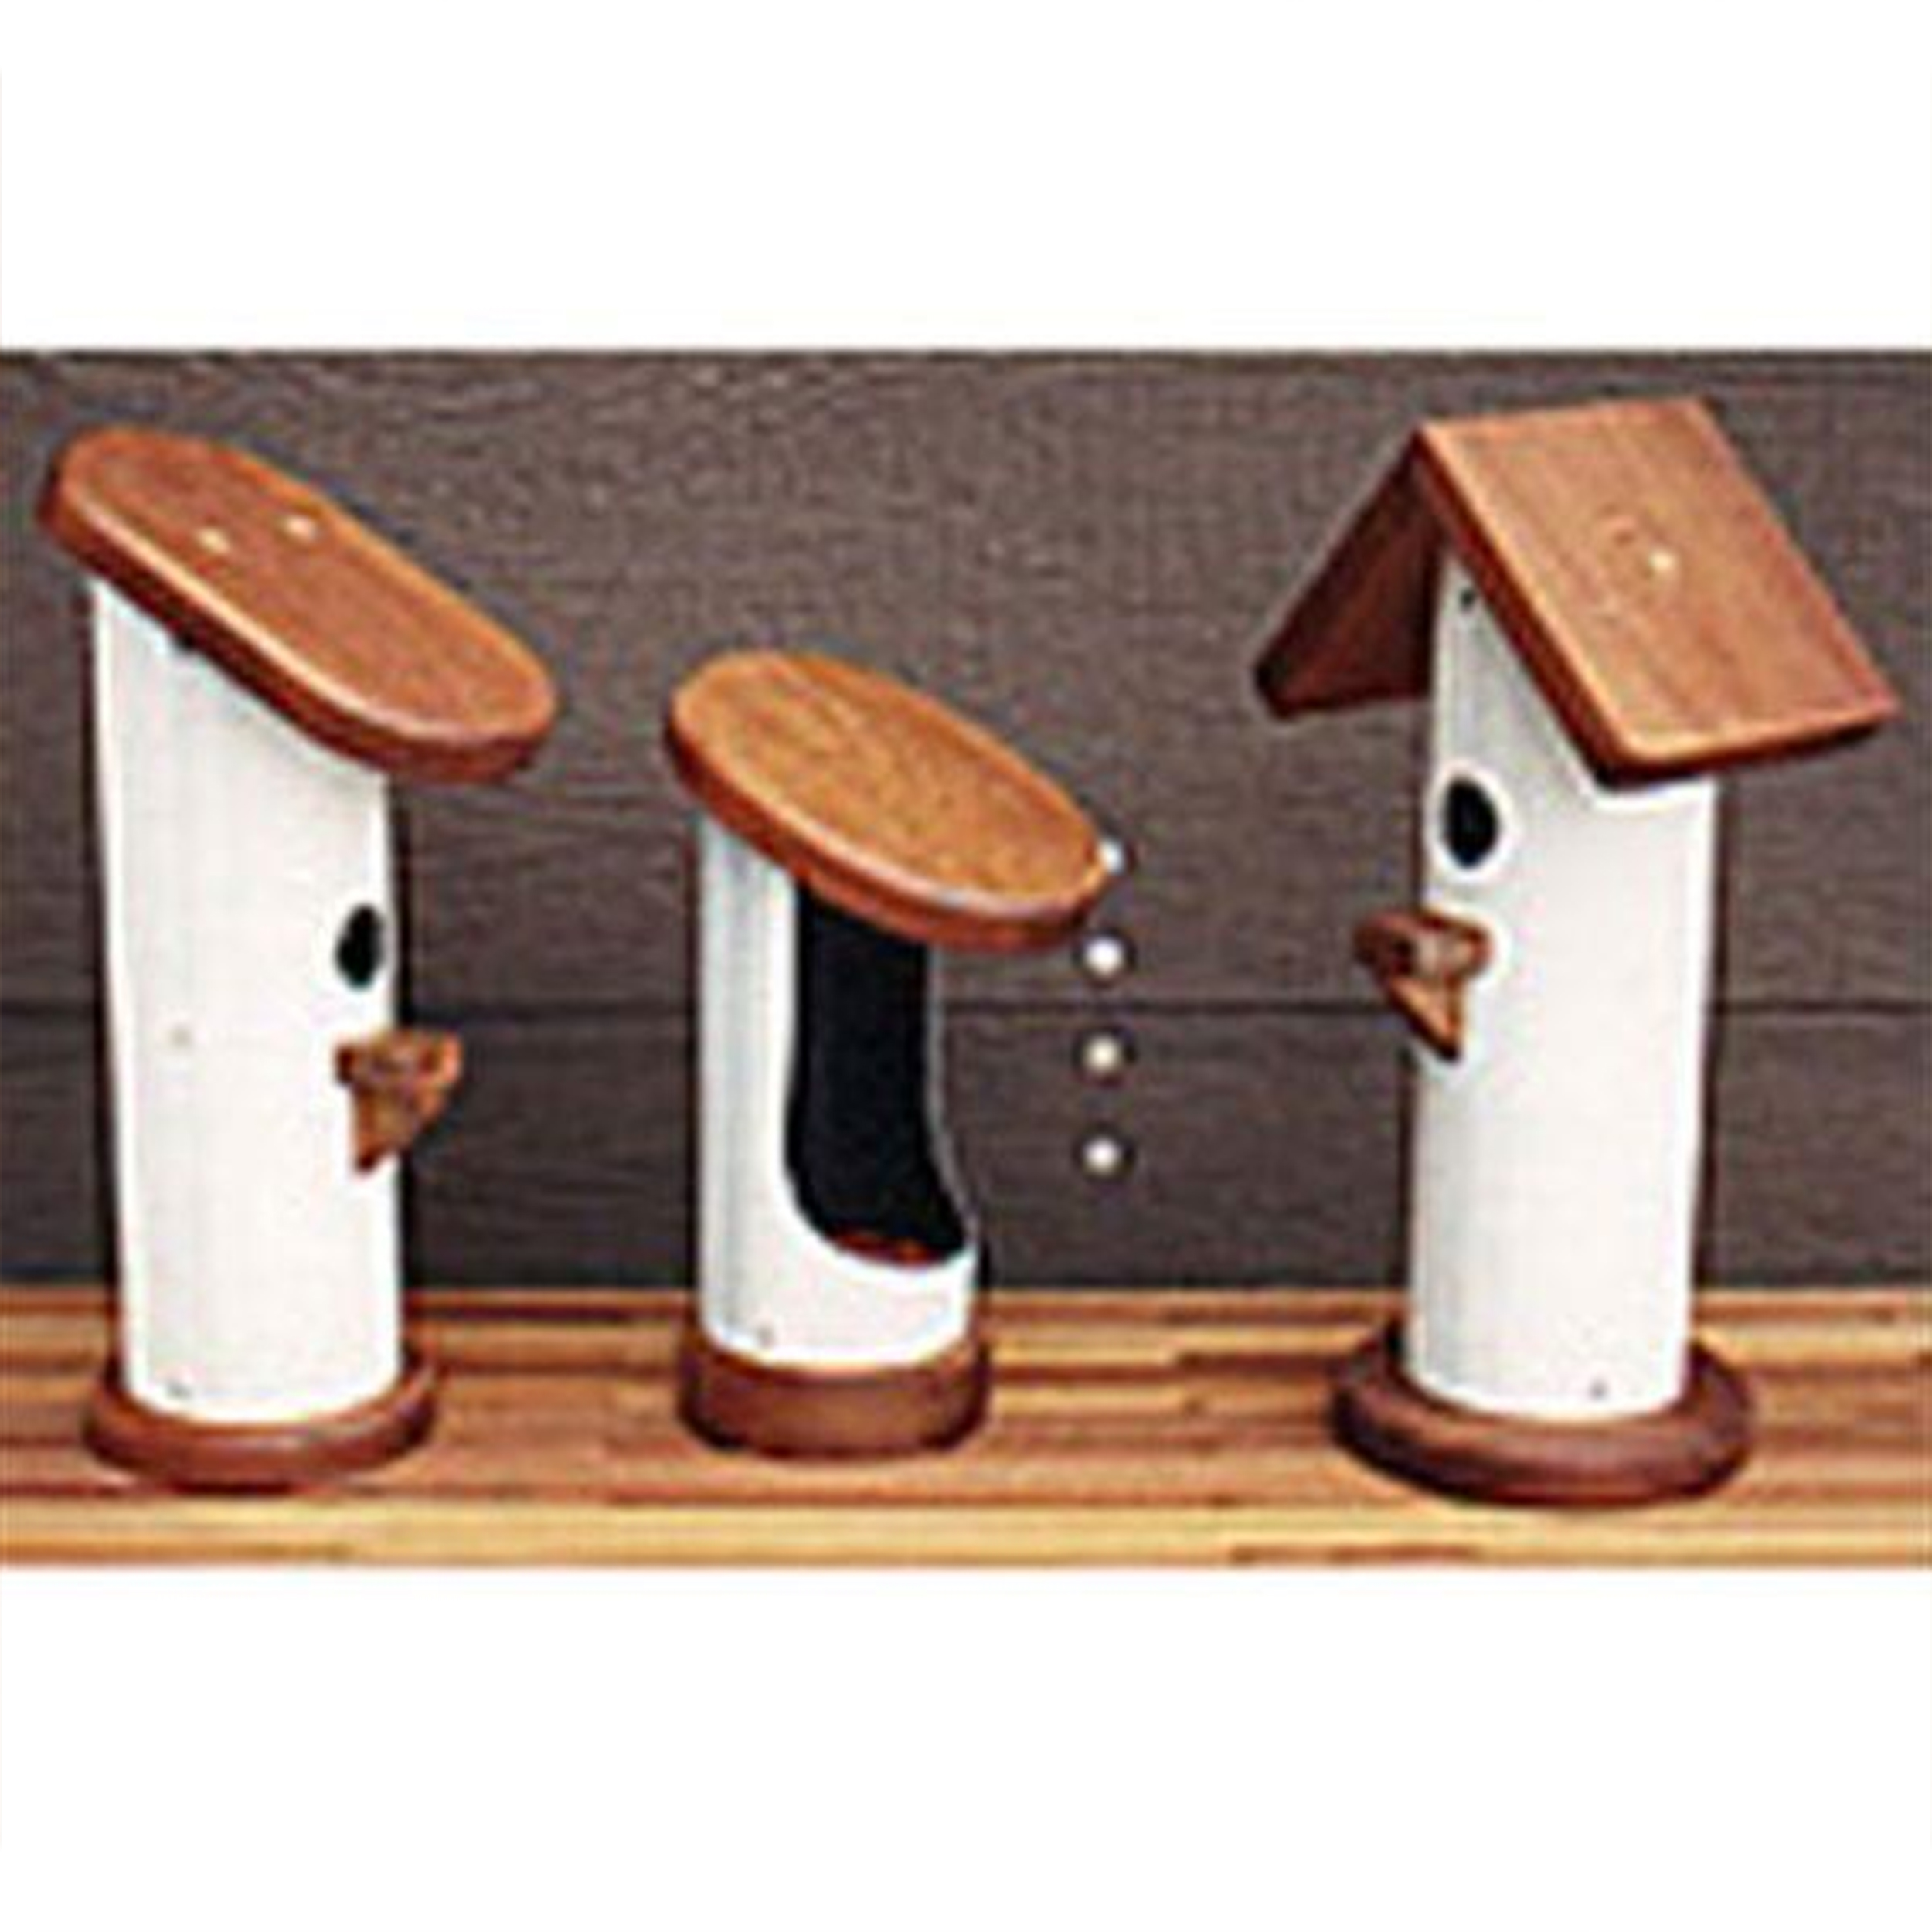 Woodworking Project Paper Plan To Build Pvc Bird Houses